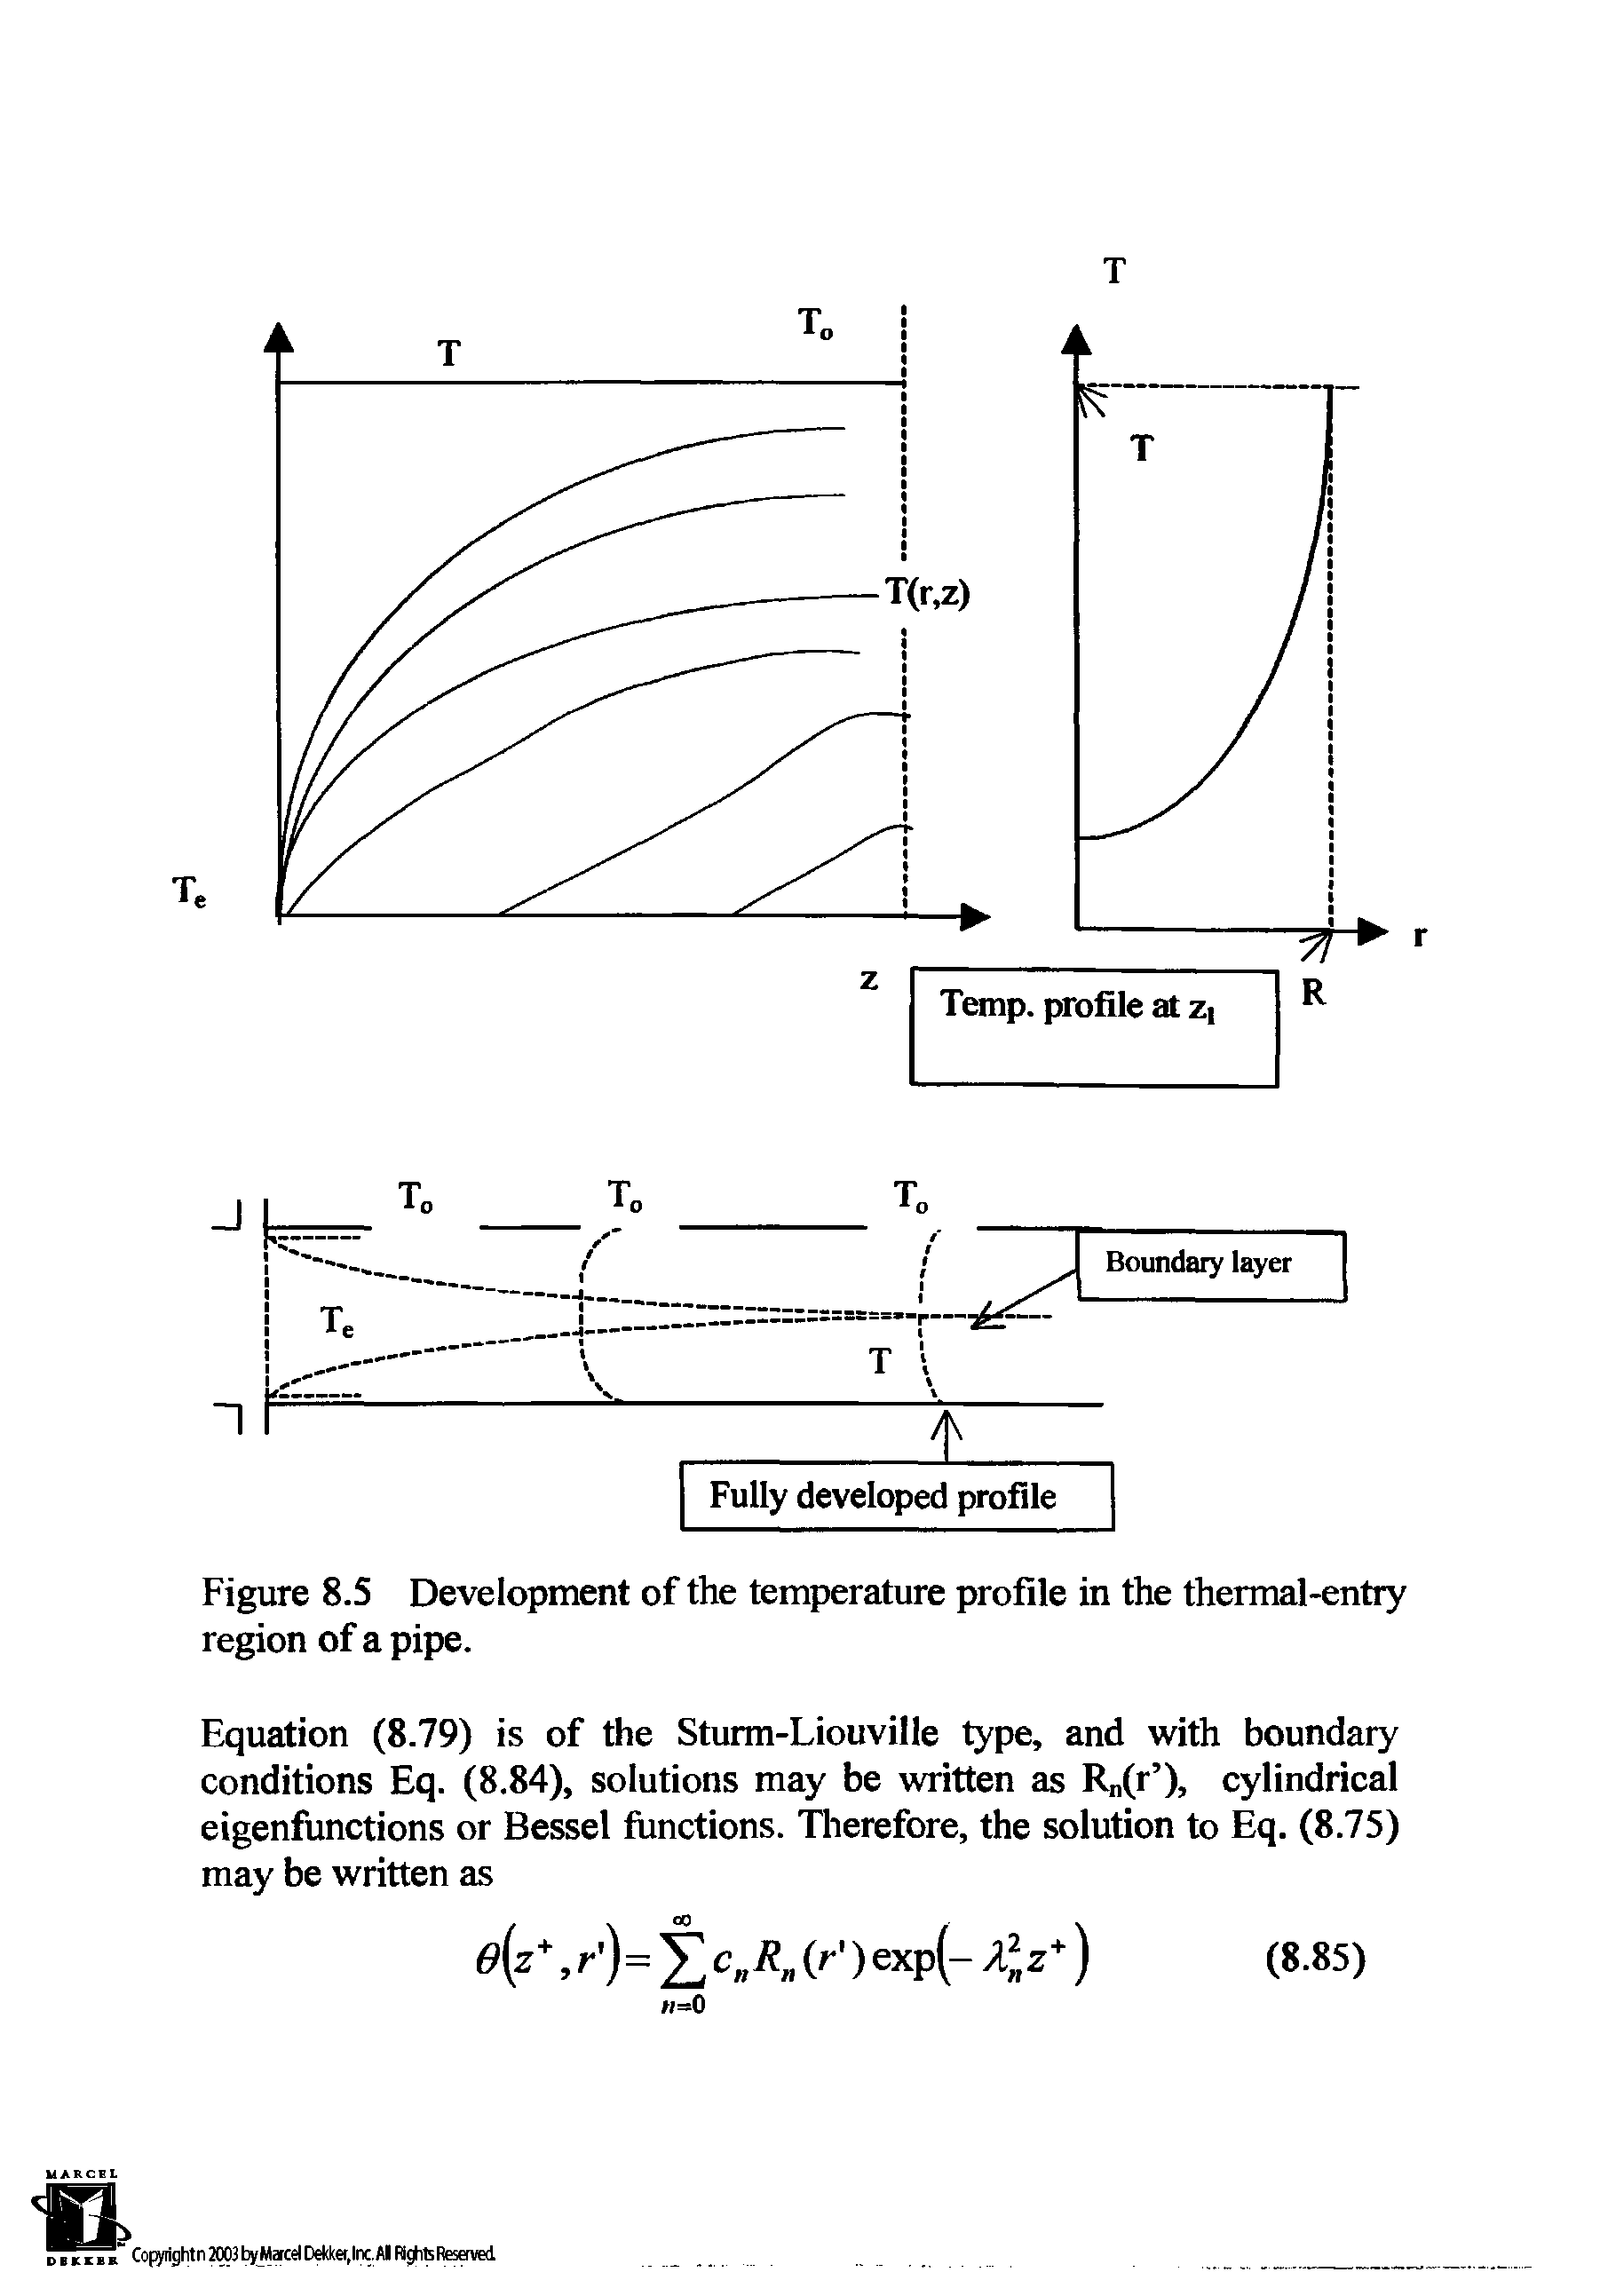 Figure 8.5 Development of the temperature profile in the thermal-entry region of a pipe.